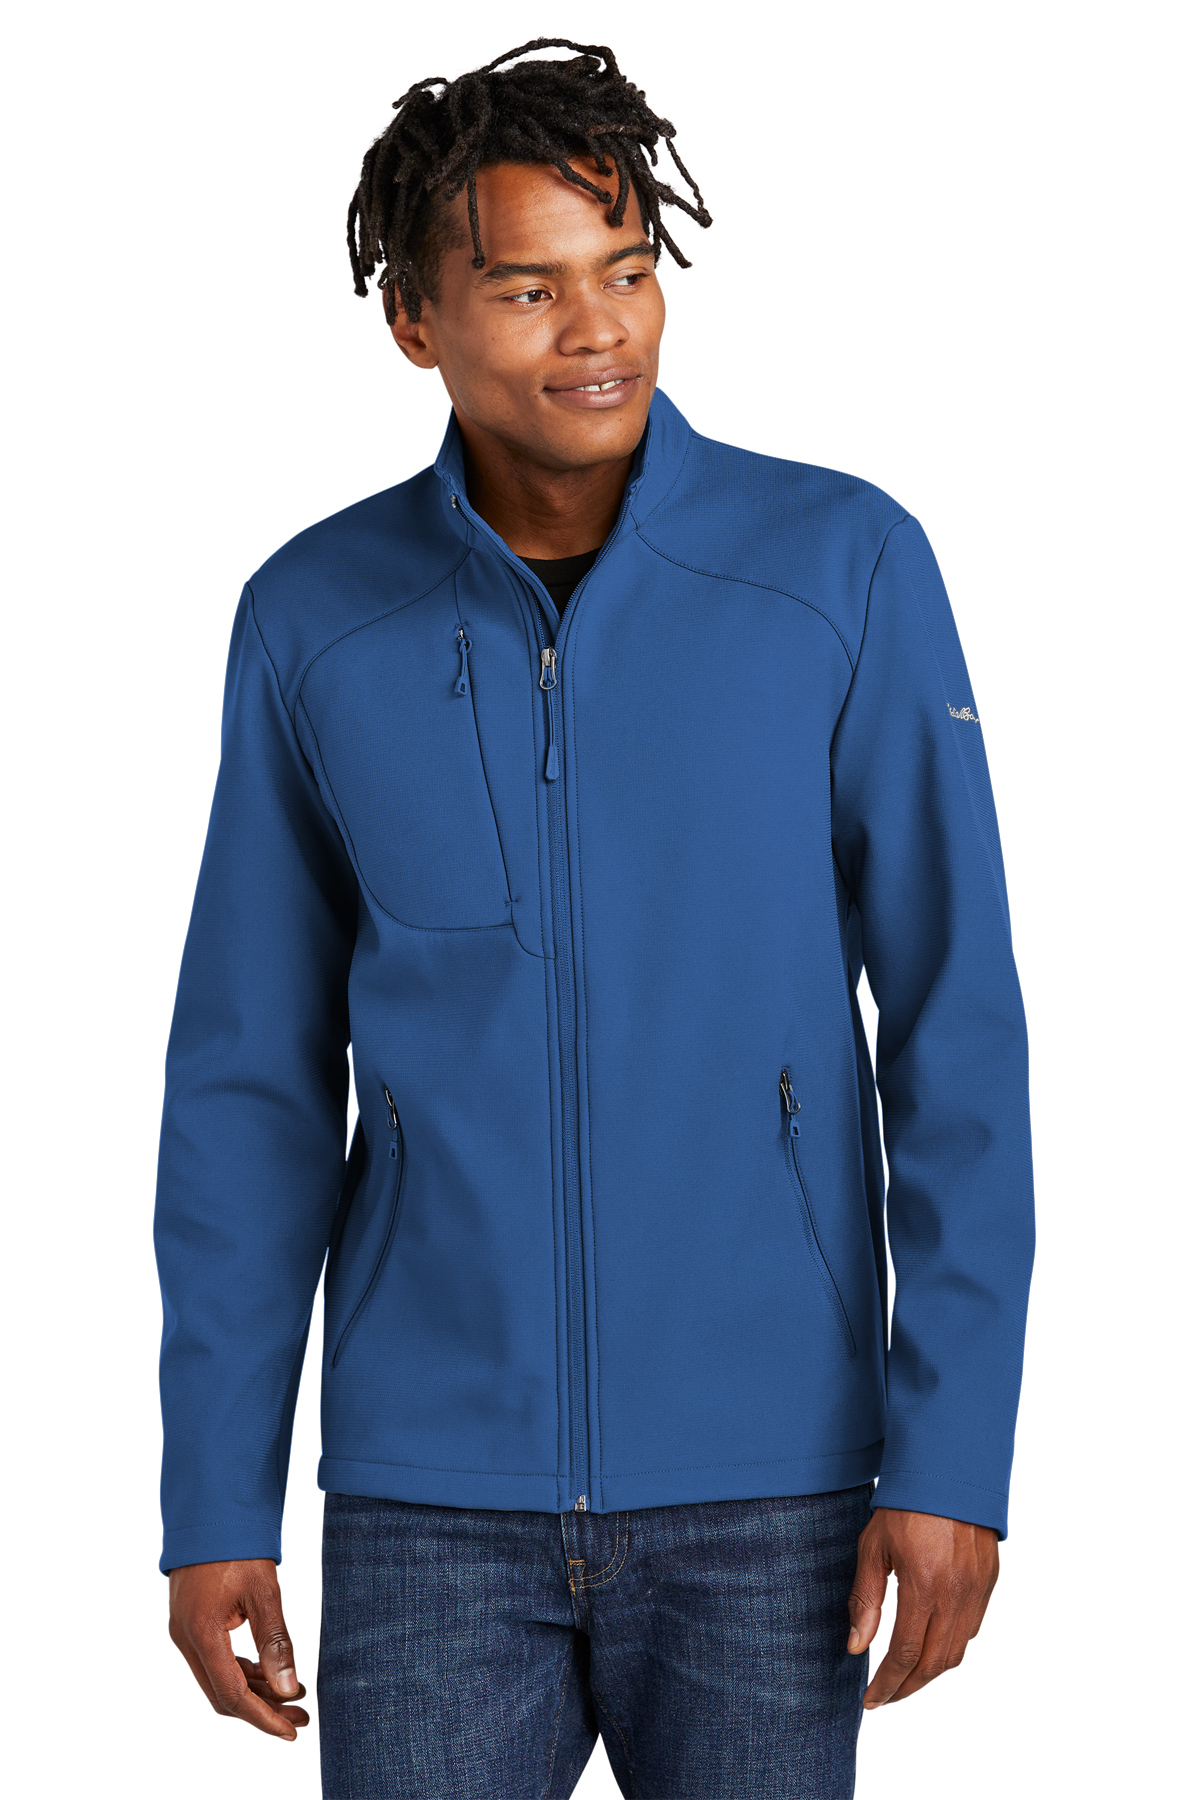 Eddie Bauer Stretch Soft Shell Jacket | Product | Company Casuals